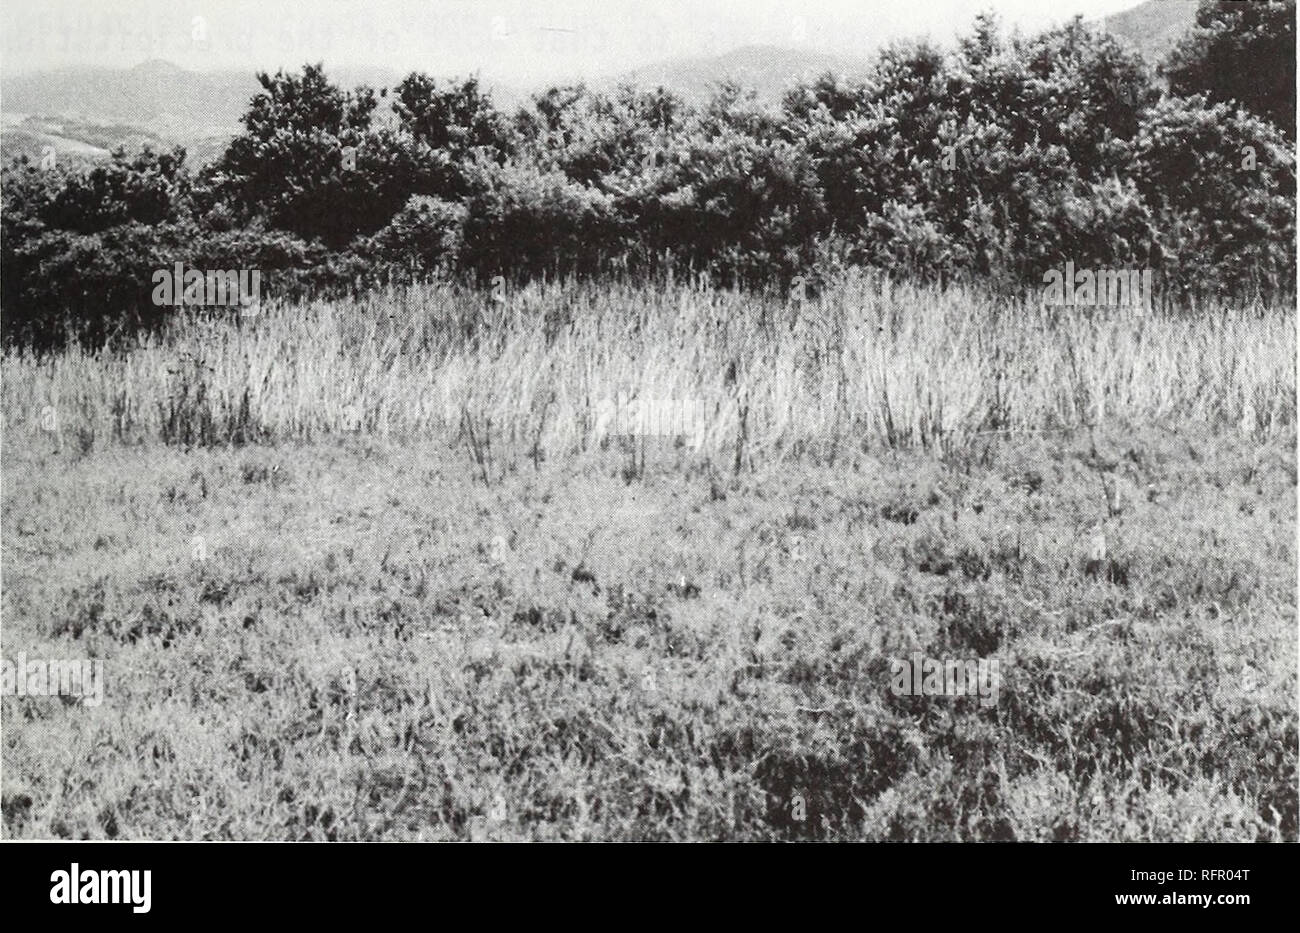 . Carpinteria Salt Marsh : environment, history, and botanical resources of a Southern California estuary. Salt marsh ecology; Salt marsh plants. Fig. 29 TRANSITIONAL PALUSTRINE EMERGENT WETLAND: View from diked area of marsh southward toward Sandyland Cove. Wetland is dominated by Lolium multiflorum (fore- ground) and Arthrocnemum subterminale (left center), and is transitional to Cismontane Introduced Grasses (right center).. #â¢'*./*&quot; â ' sH Fig. 30. PALUSTRINE FORESTED WETLAND: View from estuary northward toward the Santa Ynez Mountains. Forested wetland (background) is dominated by S Stock Photo